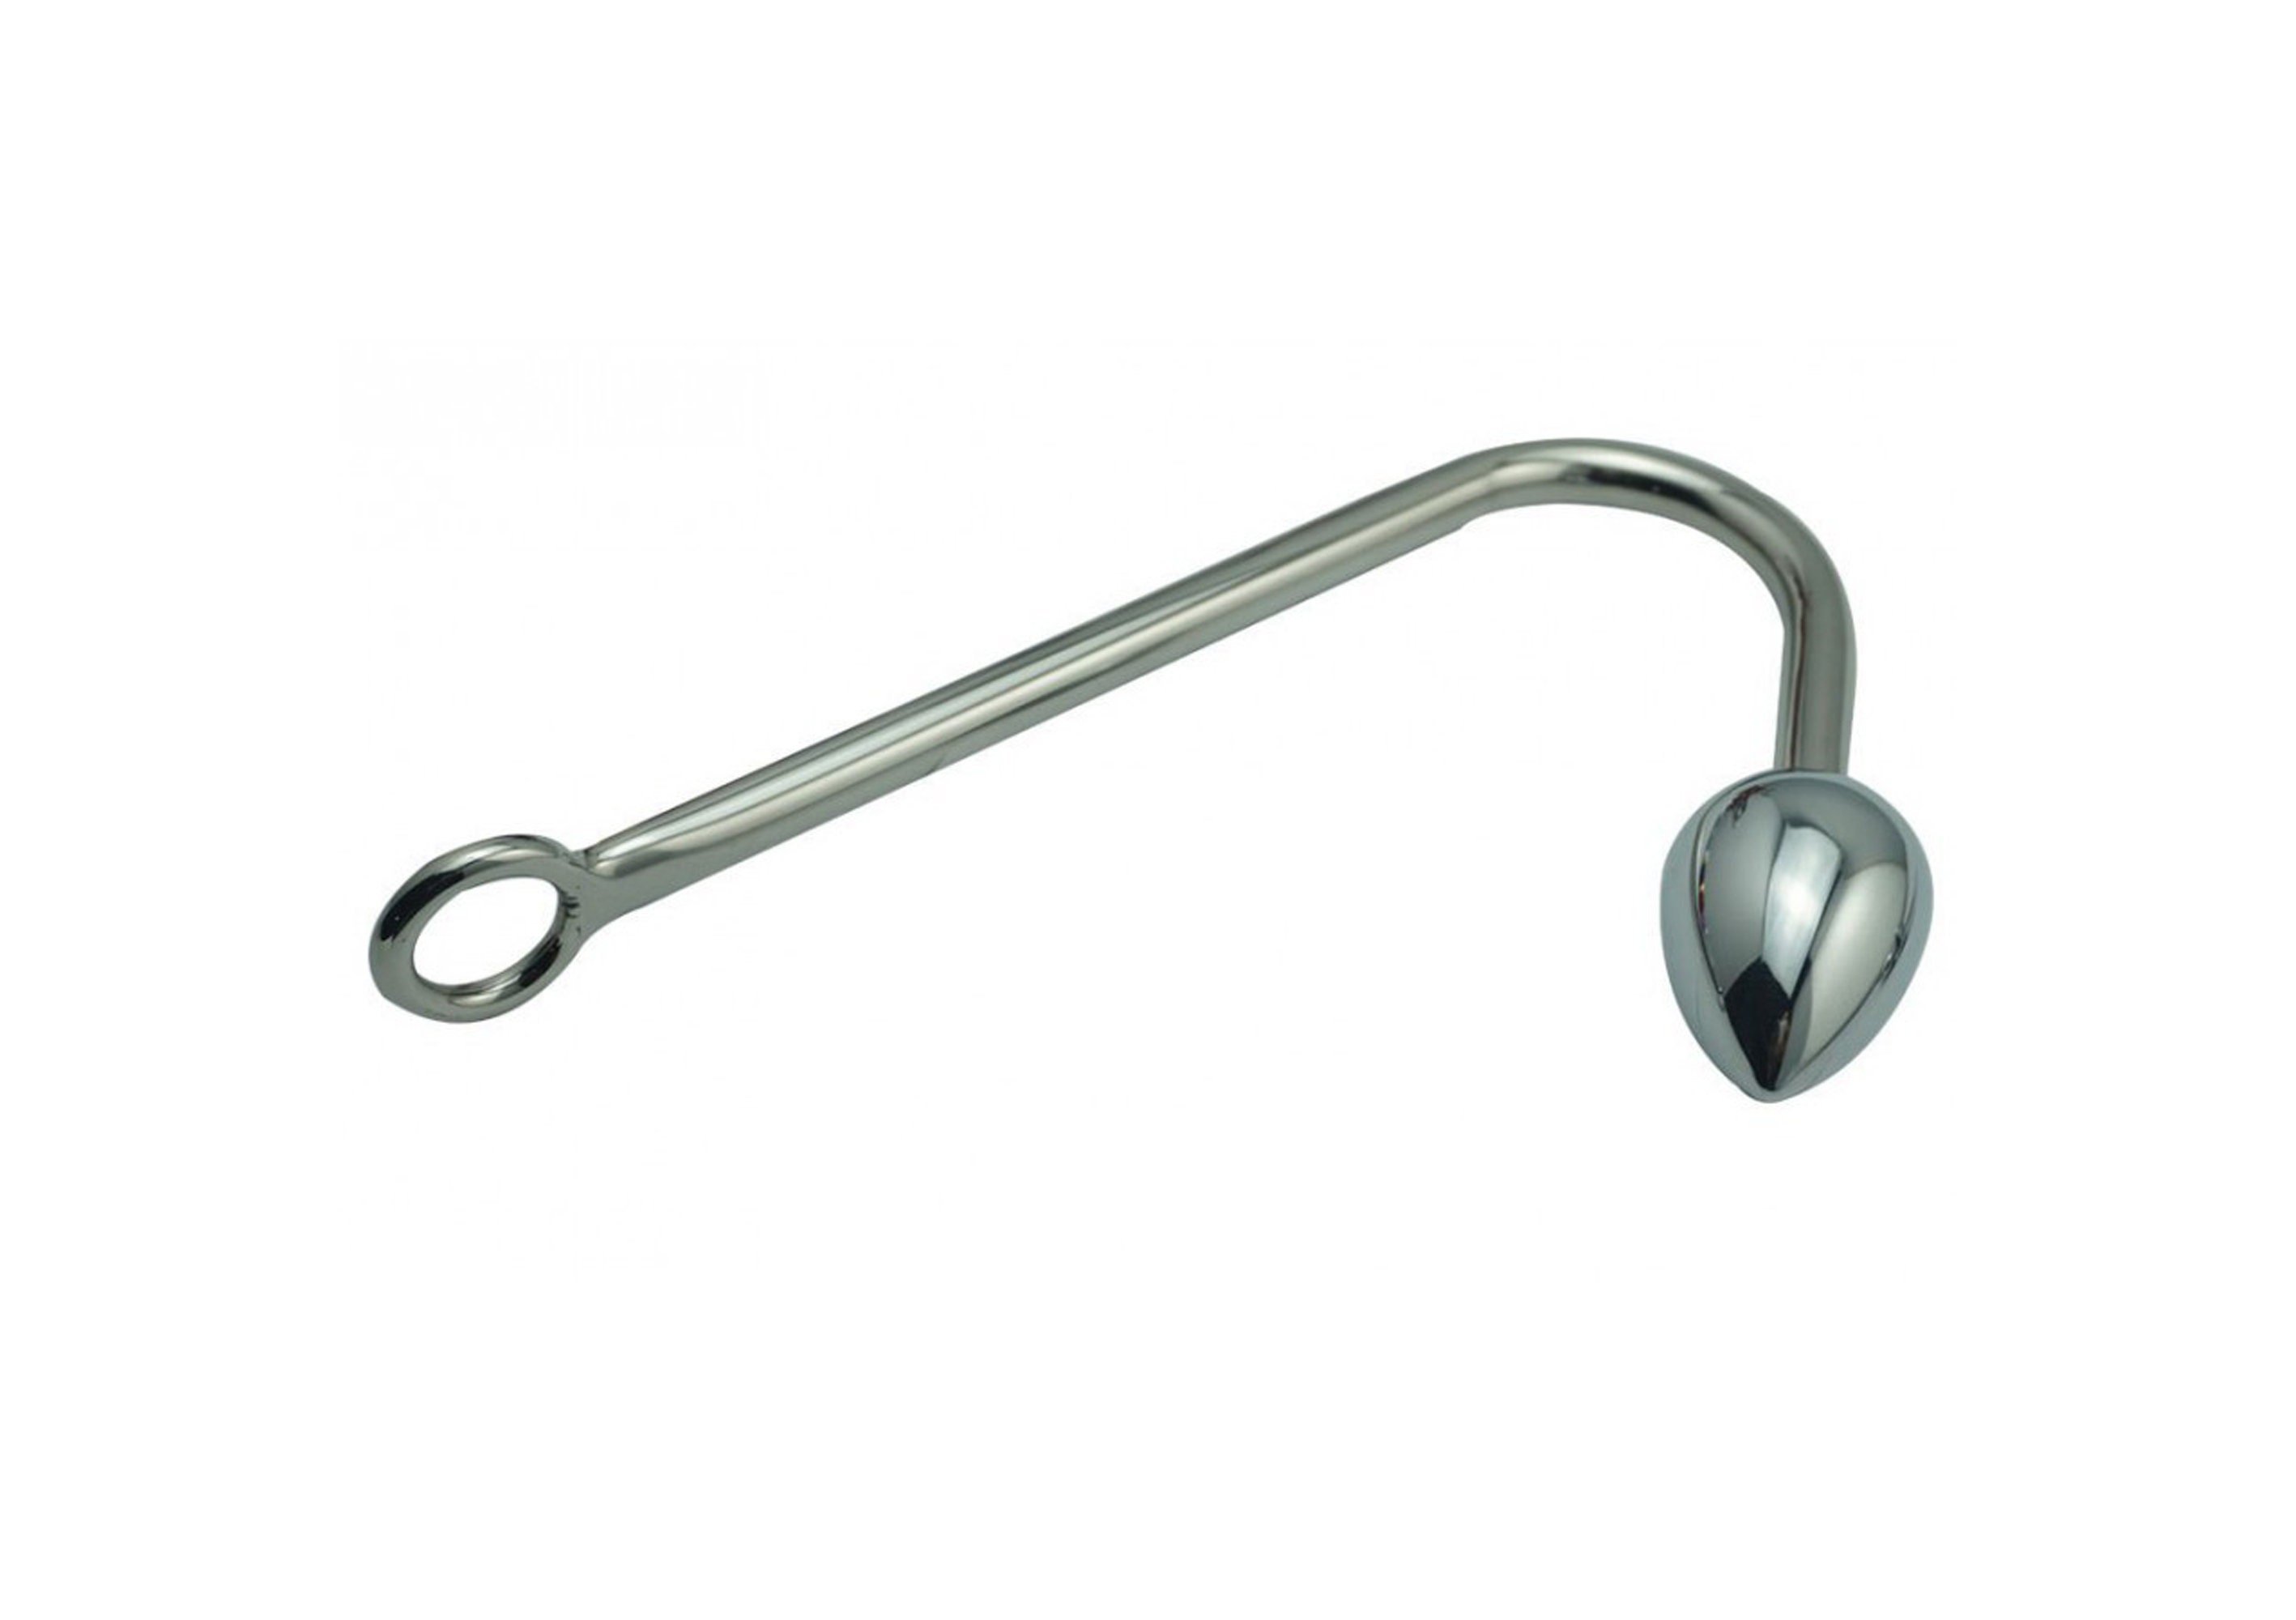 XL Ball Stretcher Made of Stainless Steel 